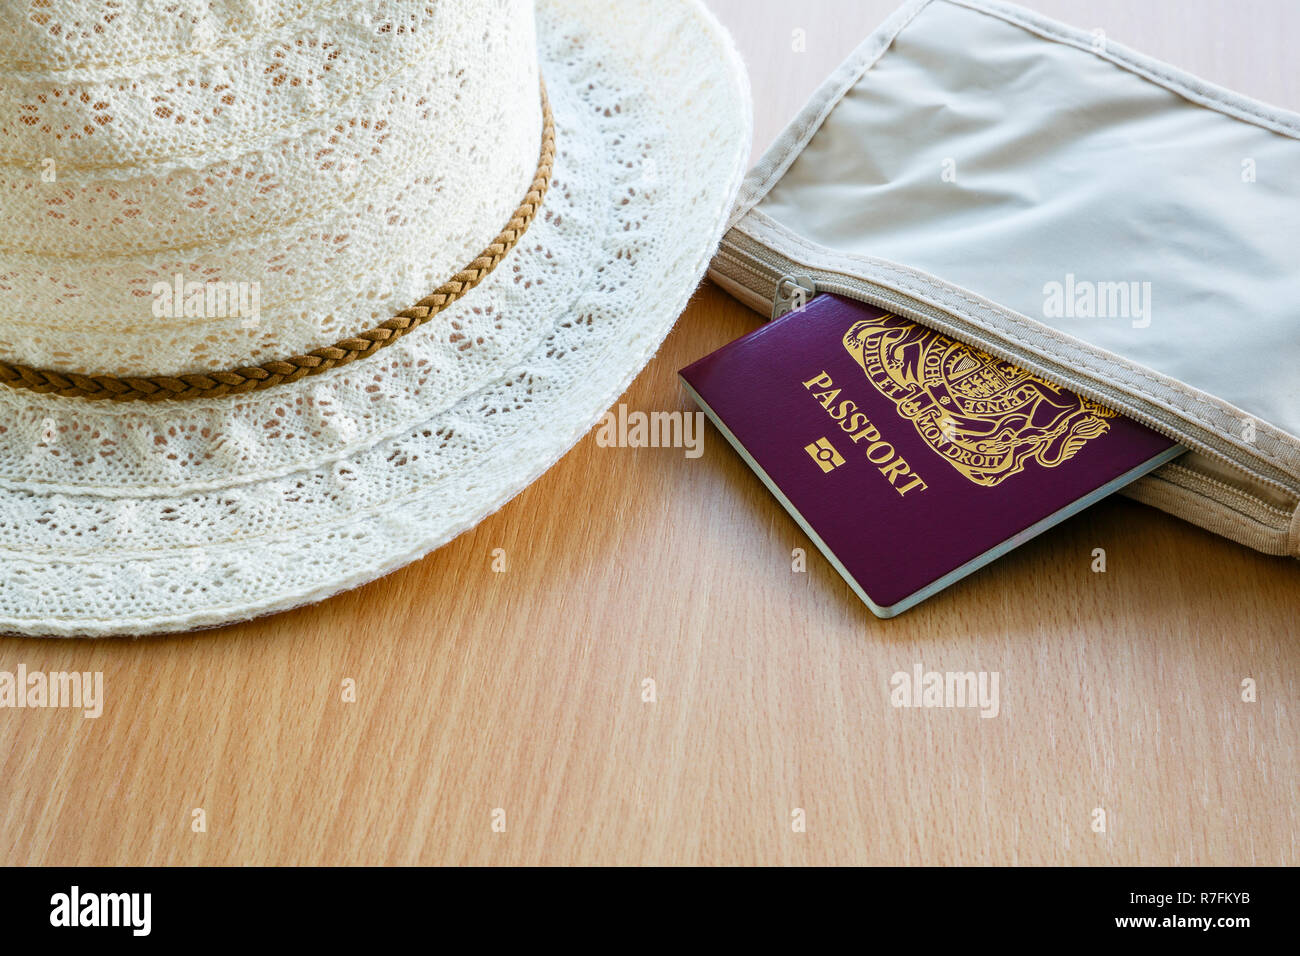 Travel things concept for travelling abroad British biometric passport in a wallet with lady's sunhat on a table top. England, UK, Britain Stock Photo